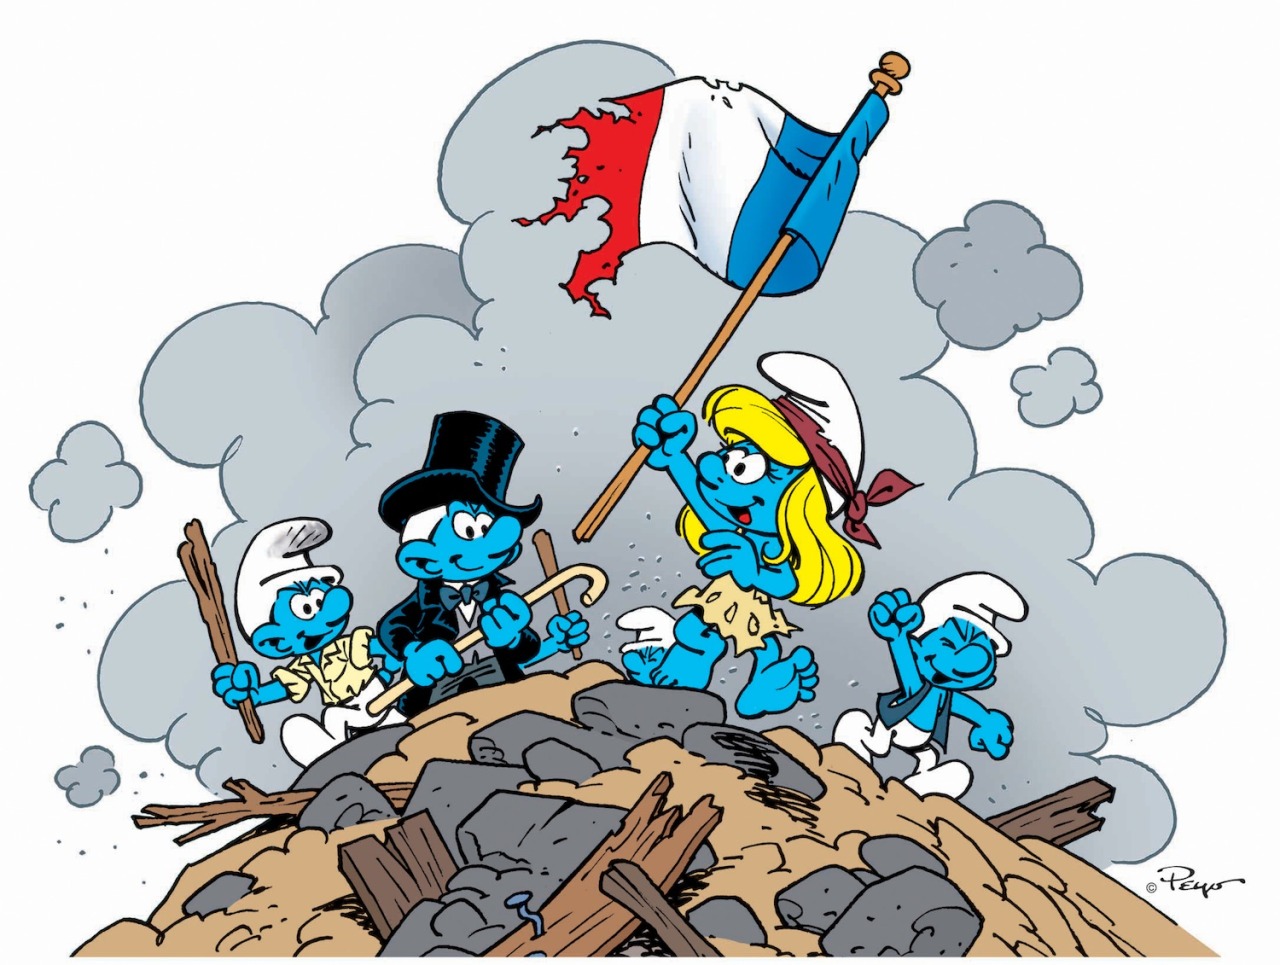 Viva La Smurf! In France, today is Bastille Day. Once again, LAFIG, the wonderful company in charge of all things Smurf, has provided me with the image commemorating this historic time in French history.
This image is a Smurfy take on the famous...